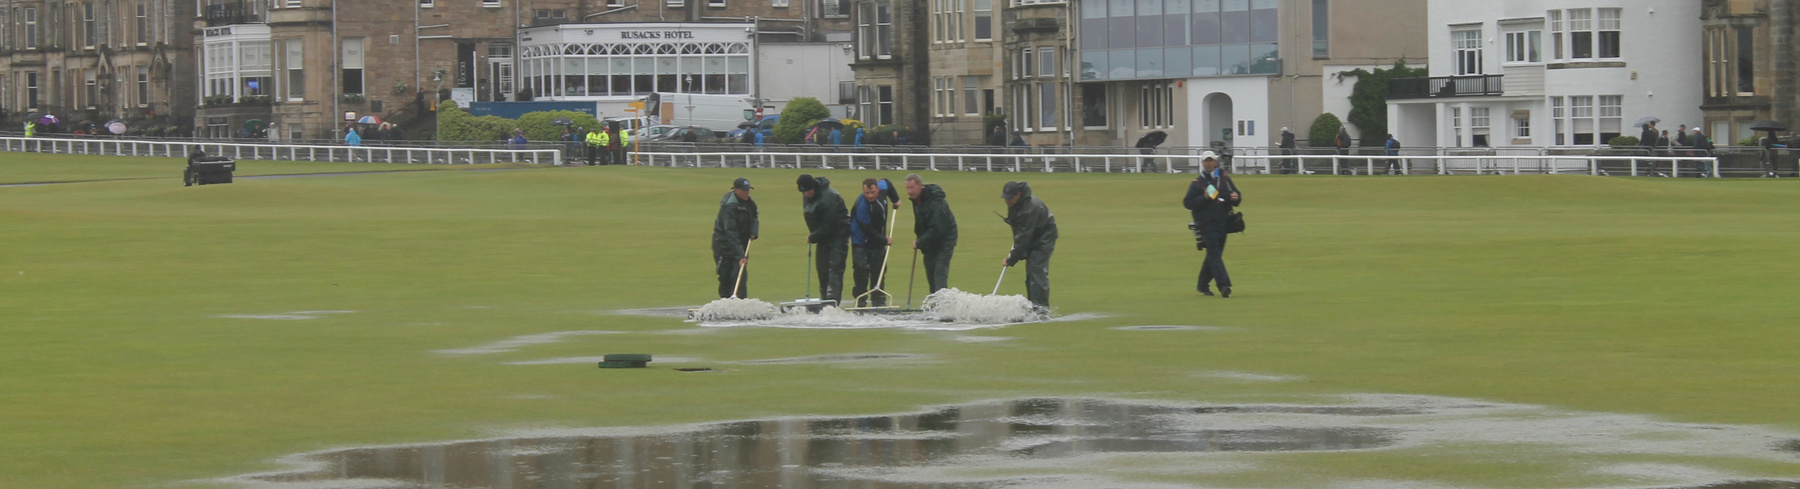 Greenkeepers clear rainwater from the Old Course, July 2015